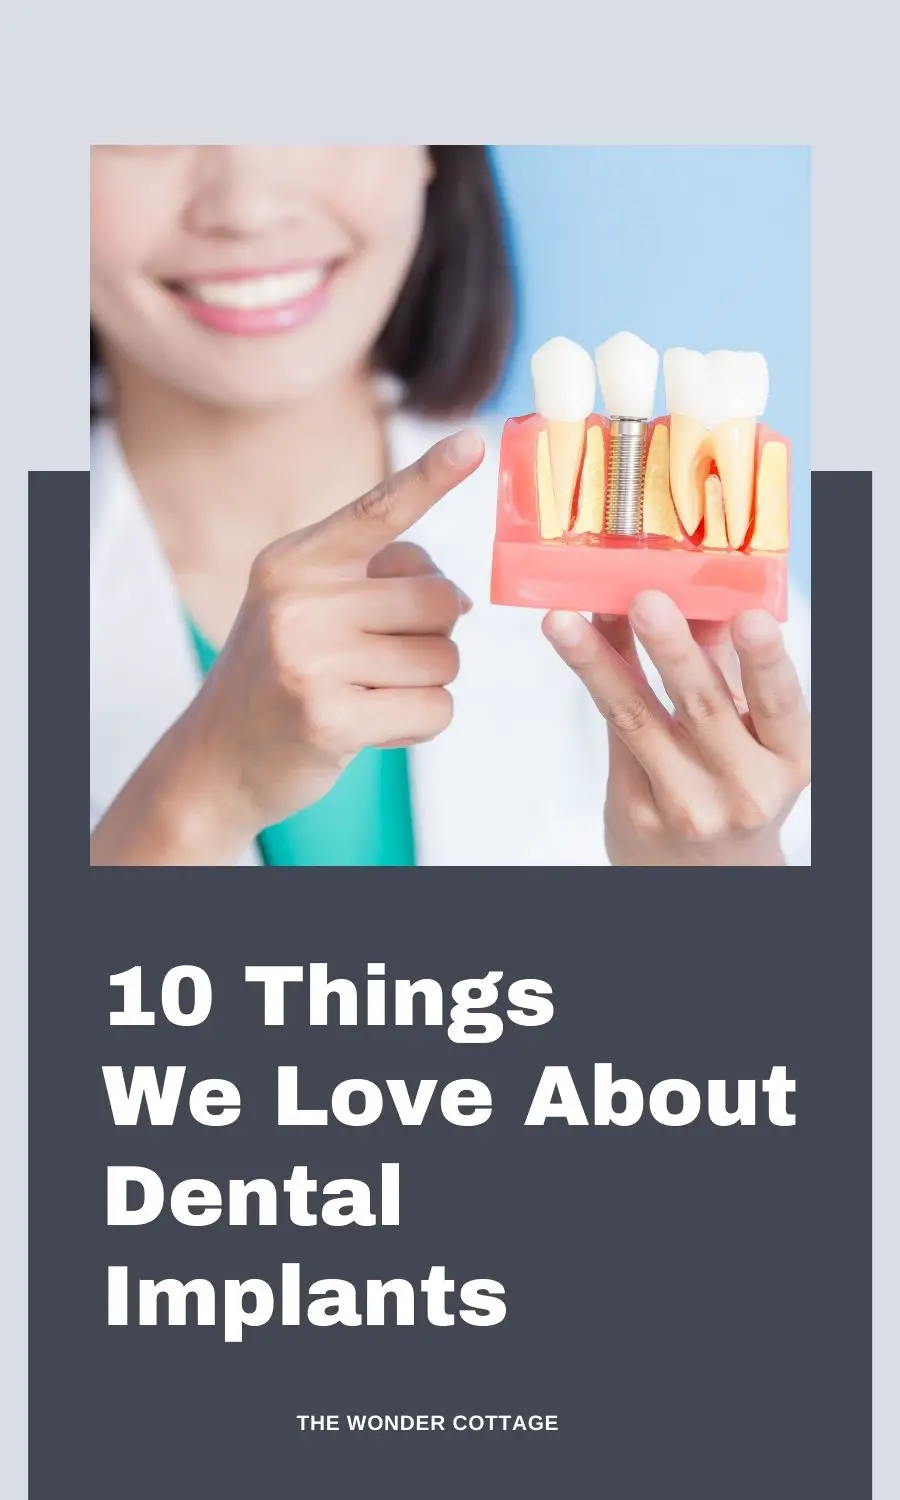 10 Things We Love About Dental Implants